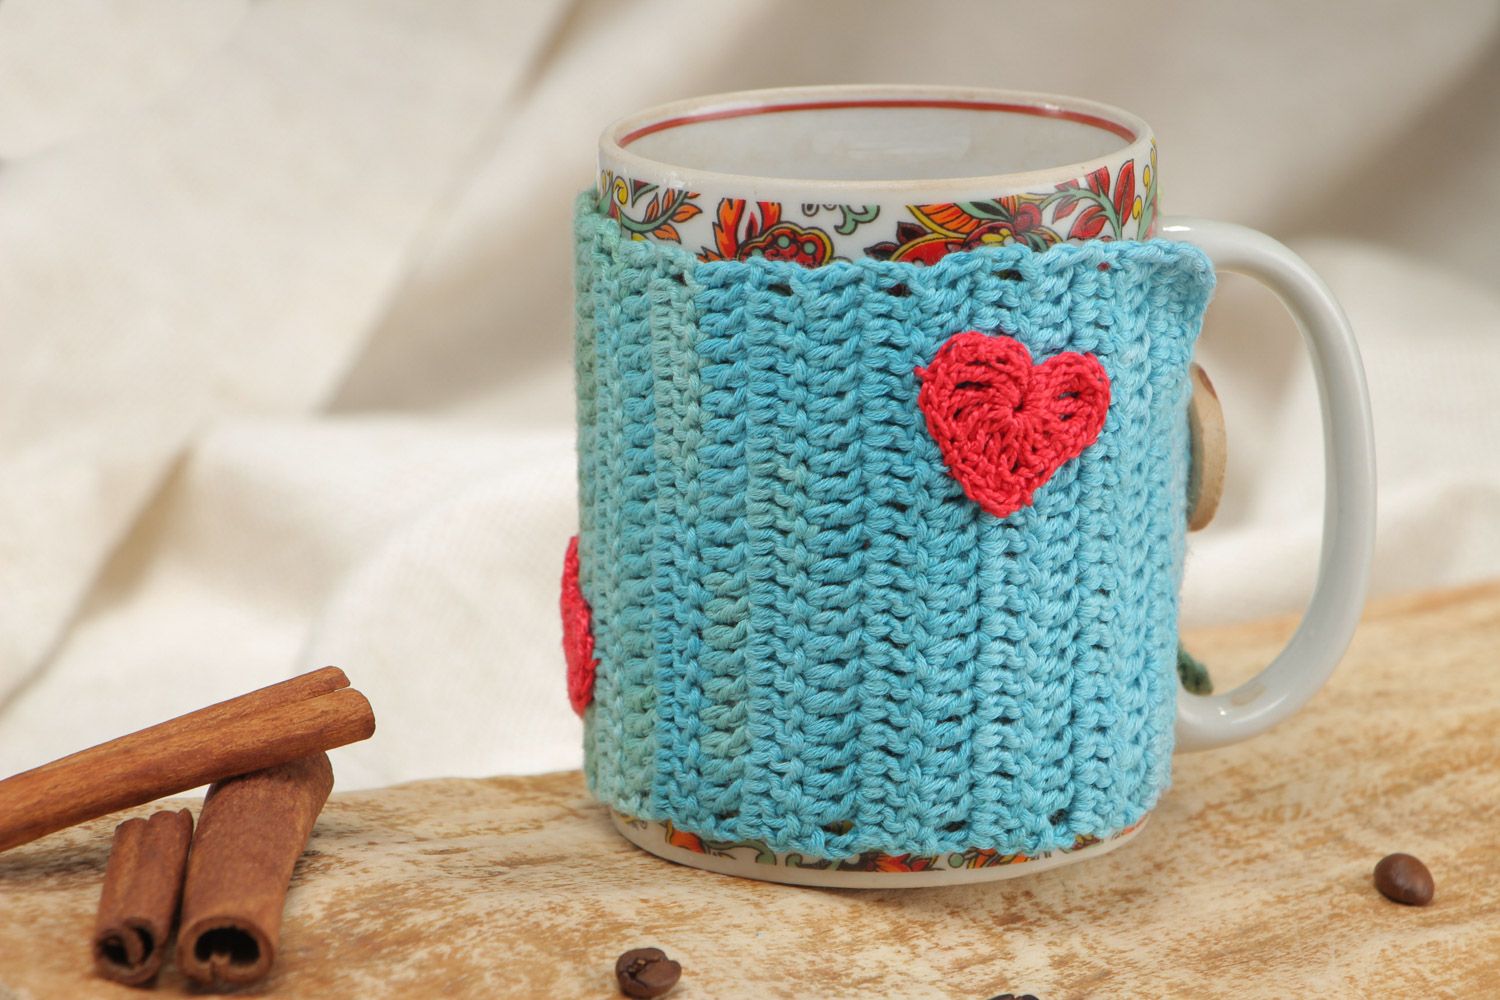 Blue and green handmade crochet cotton cup cozy photo 1